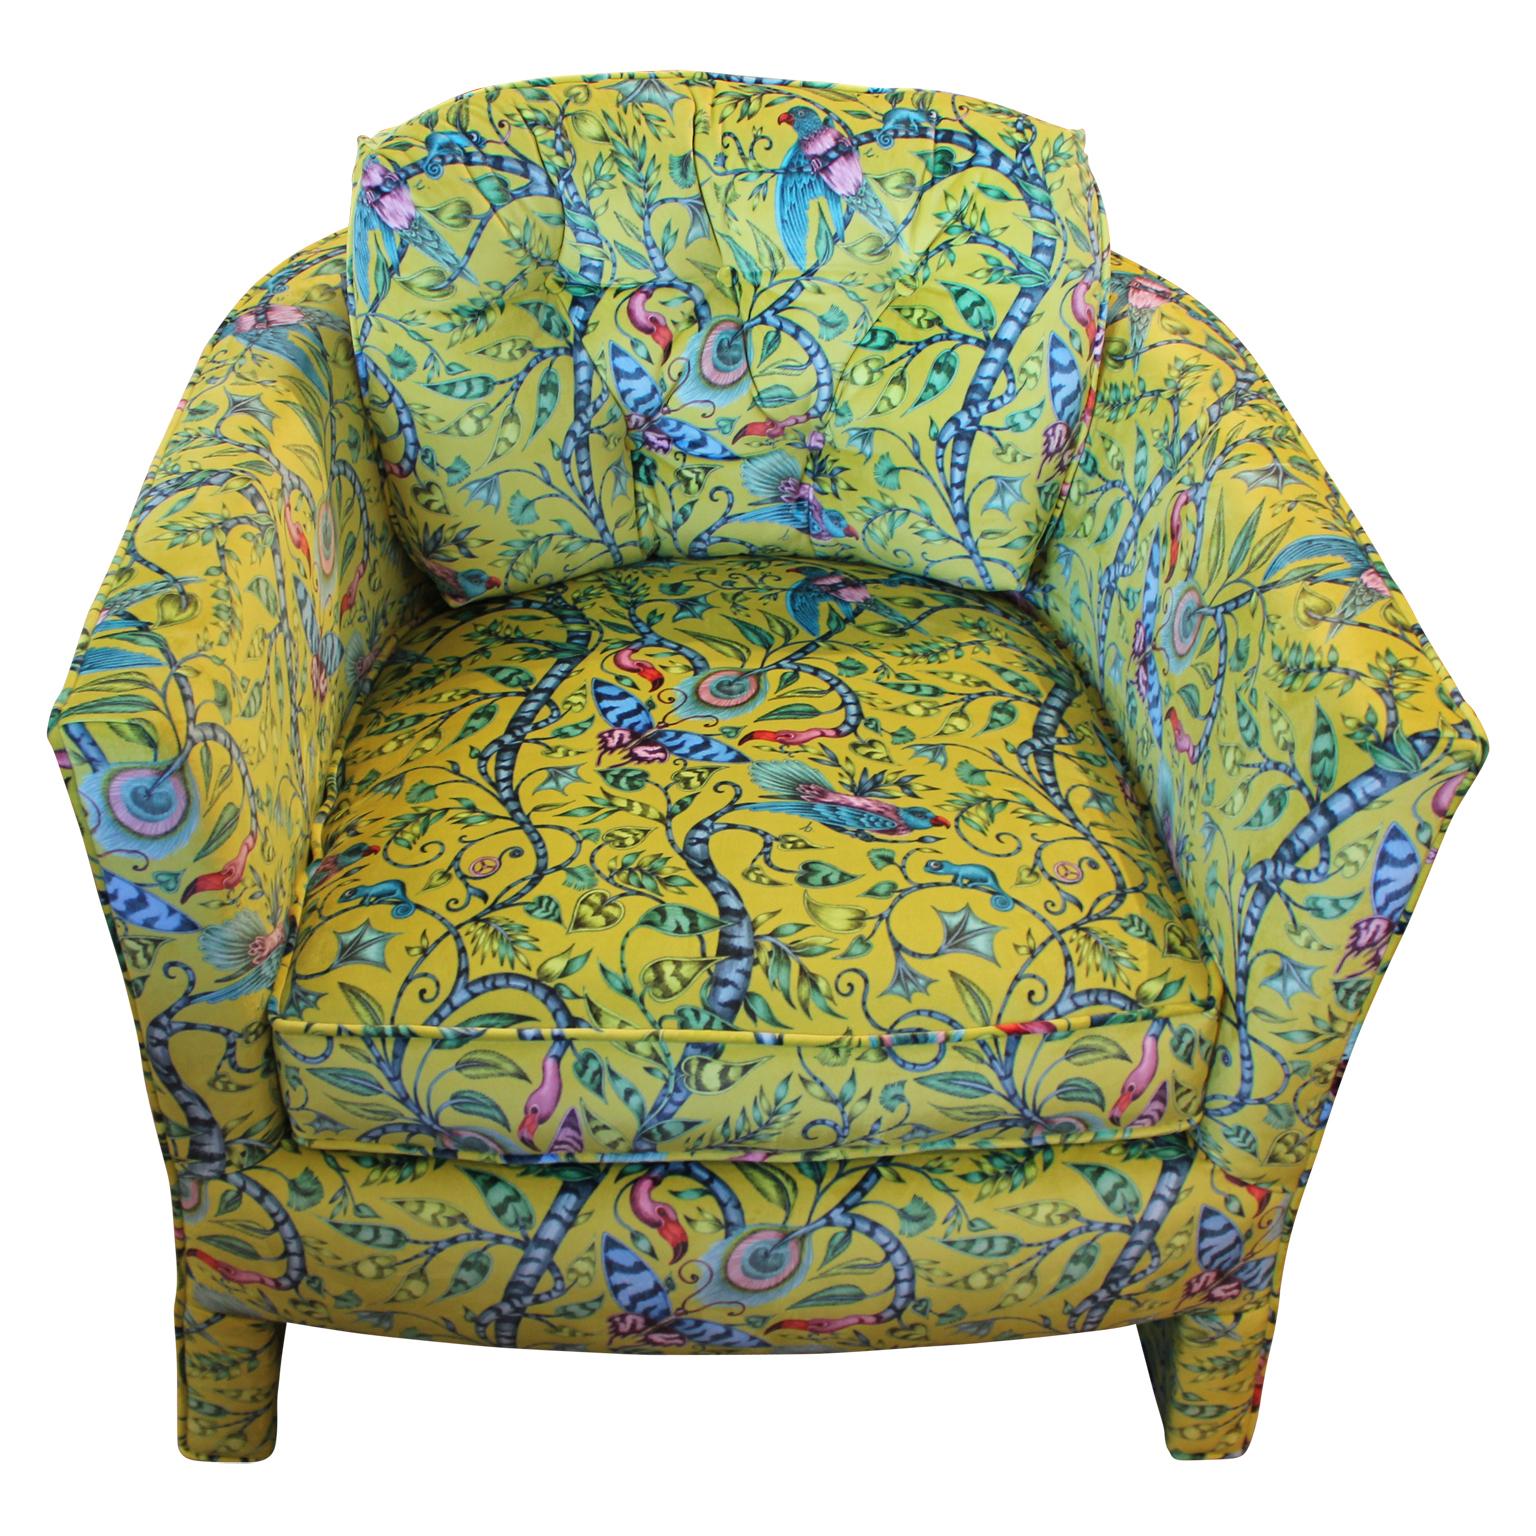 Comfortable and stylish barrel back chairs. They have been freshly upholstered with a lime yellow velvet. The velvet features birds, peacock feathers, and butterflies on vines.